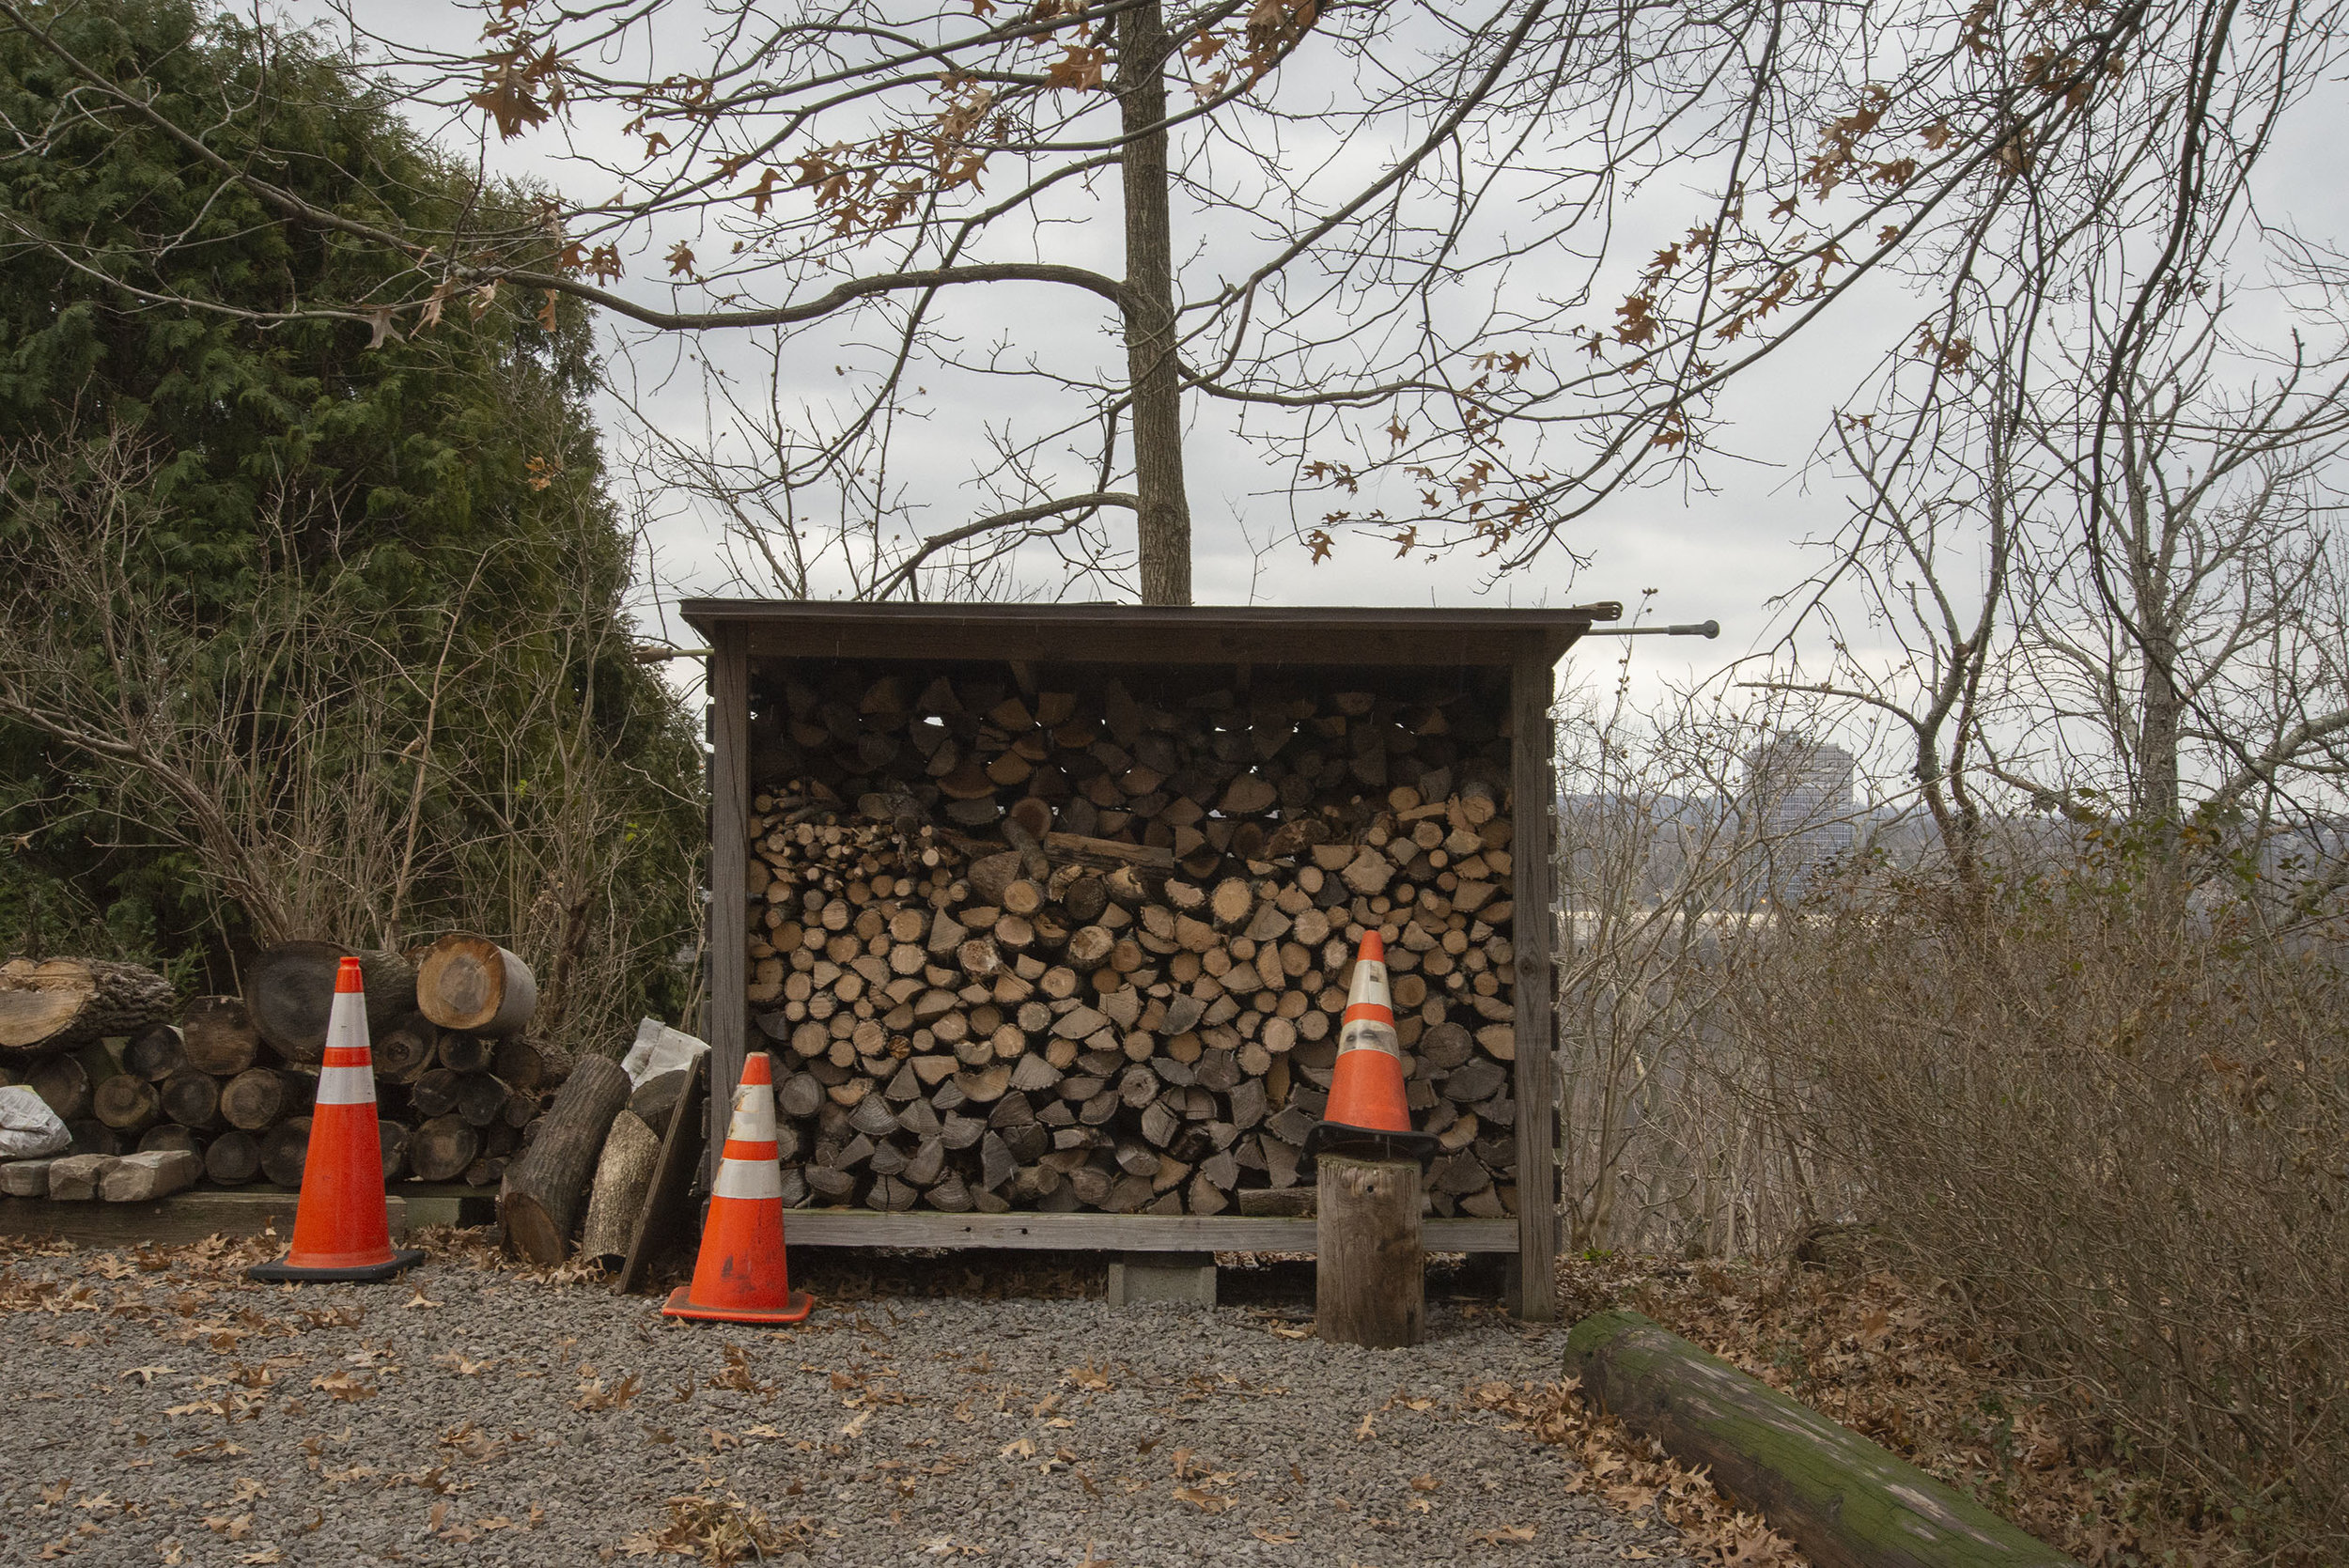 Wood Pile above the Allegheny